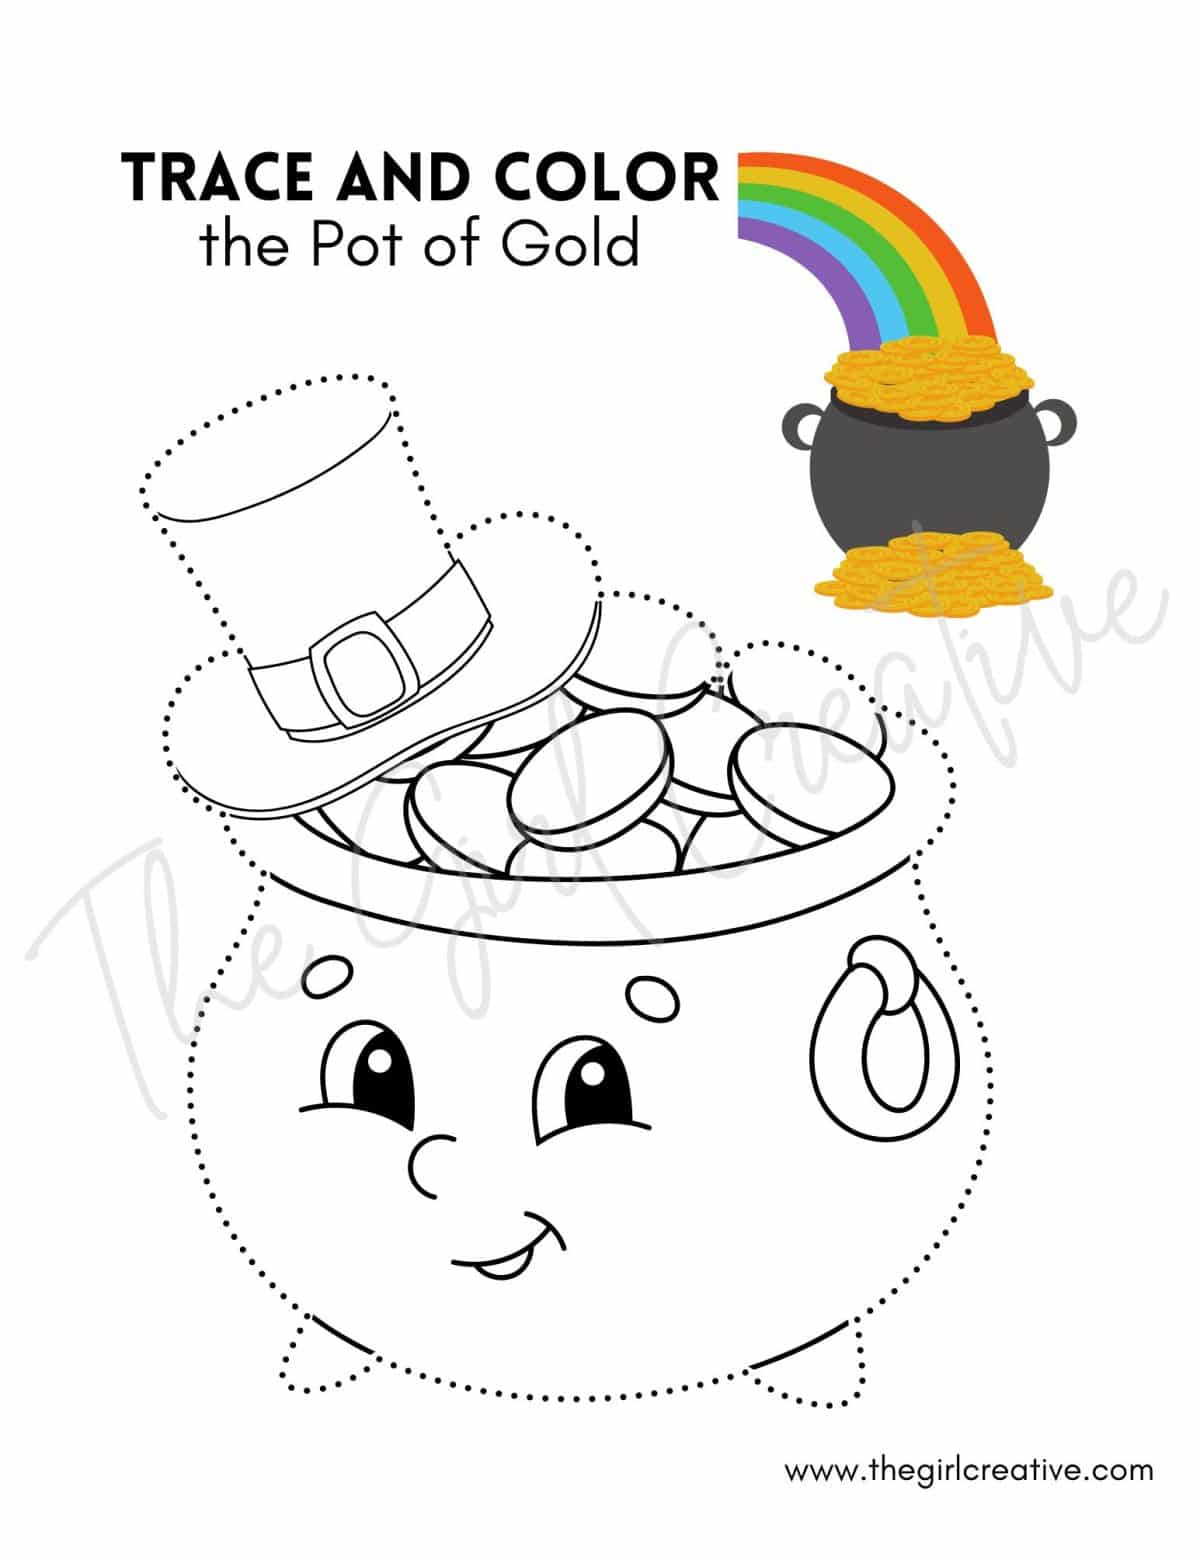 Pot of Gold coloring page for St. Patrick's Day